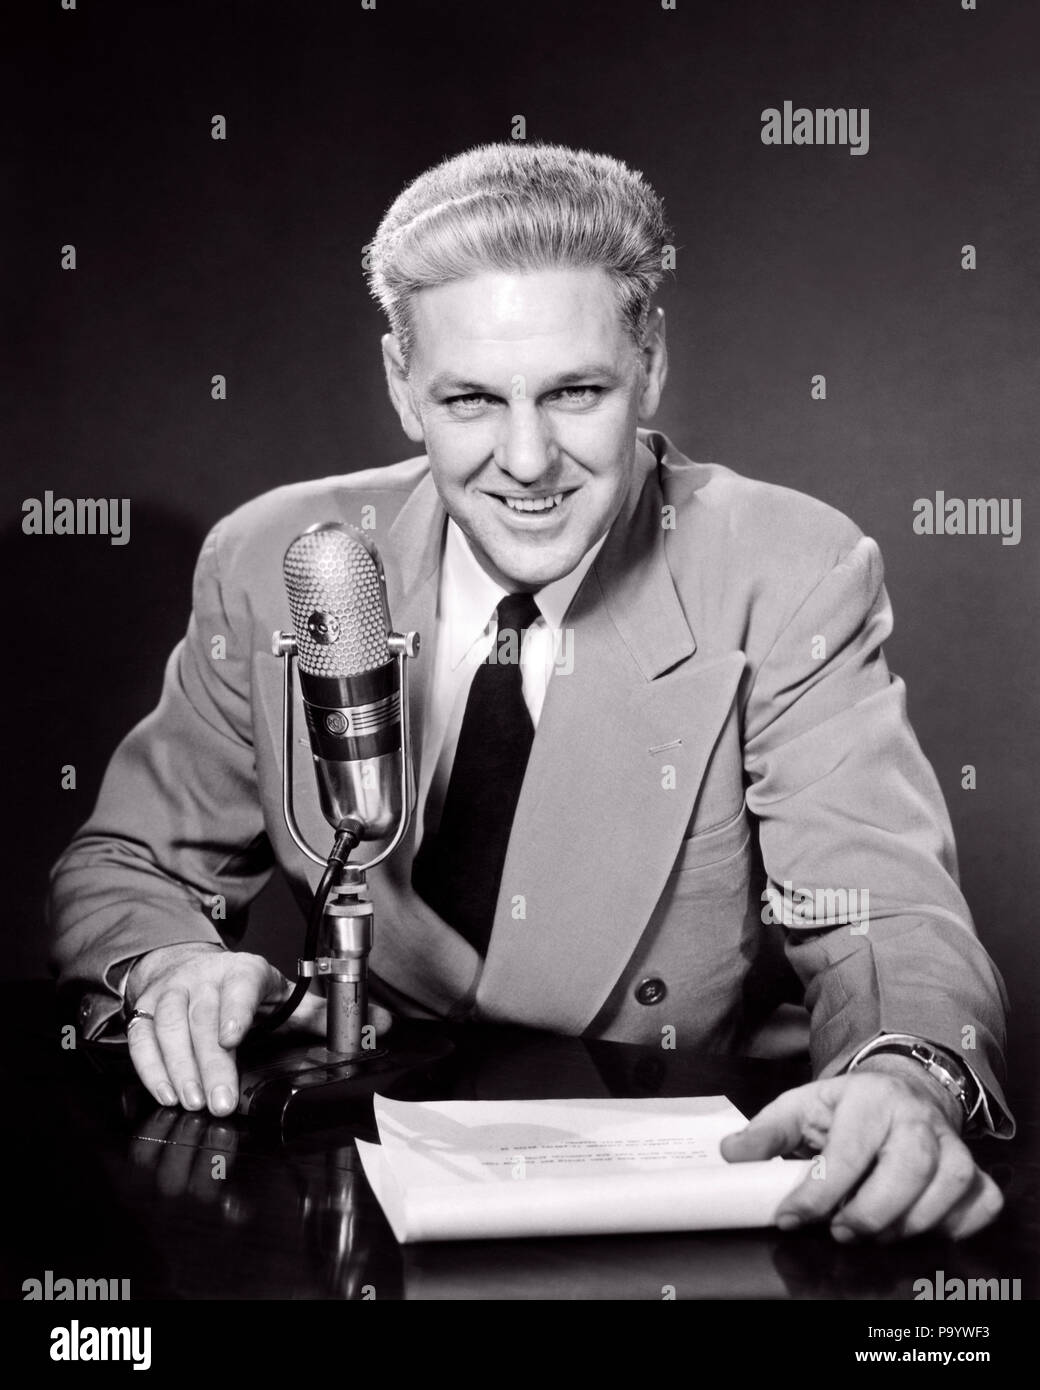 1950s SMILING MIDDLE AGED MAN NEWSMAN ANNOUNCER  TALKING INTO MICROPHONE LOOKING AT CAMERA - r4379 HAR001 HARS FACIAL STYLE COMMUNICATION BLOND COMPETITION PLEASED JOY LIFESTYLE JOBS HALF-LENGTH PERSONS MALES ENTERTAINMENT CONFIDENCE EXPRESSIONS B&W EYE CONTACT FREEDOM PERFORMING ARTS SKILL SUIT AND TIE OCCUPATION SKILLS CHEERFUL ANNOUNCER HONEST EXCITEMENT KNOWLEDGE AUTHORITY OCCUPATIONS POLITICS SMILES CONNECTION JOYFUL REPORTING STYLISH TRUSTWORTHY WIDE LAPELS SINCERE MID-ADULT MID-ADULT MAN NEWSMAN ANNOUNCING BLACK AND WHITE CAUCASIAN ETHNICITY COMMENTATOR HAR001 OLD FASHIONED Stock Photo